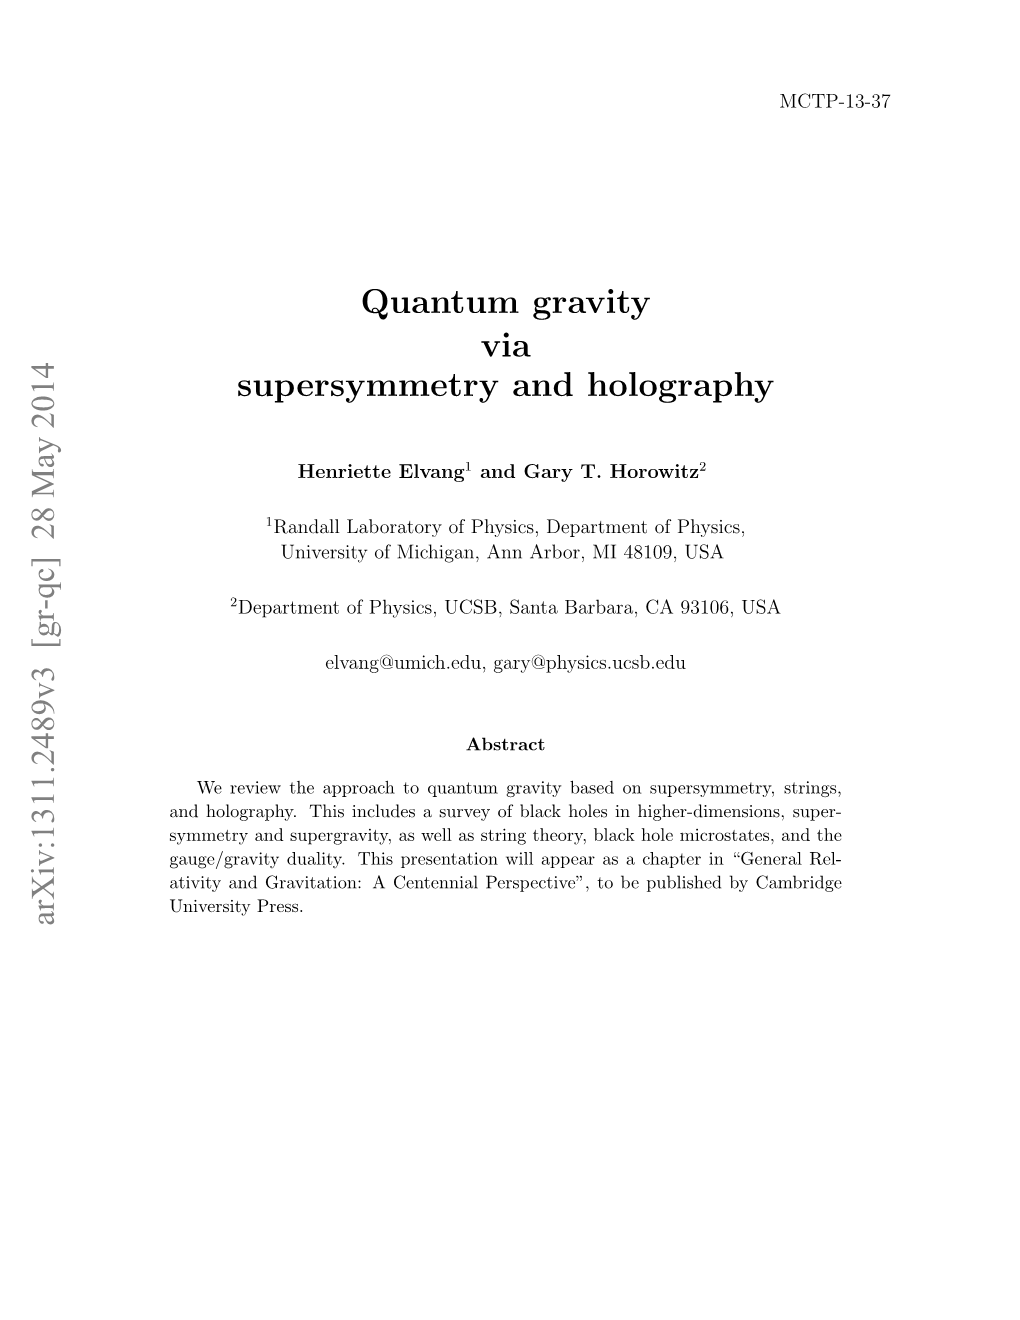 Quantum Gravity Via Supersymmetry and Holography Arxiv:1311.2489V3 [Gr-Qc] 28 May 2014